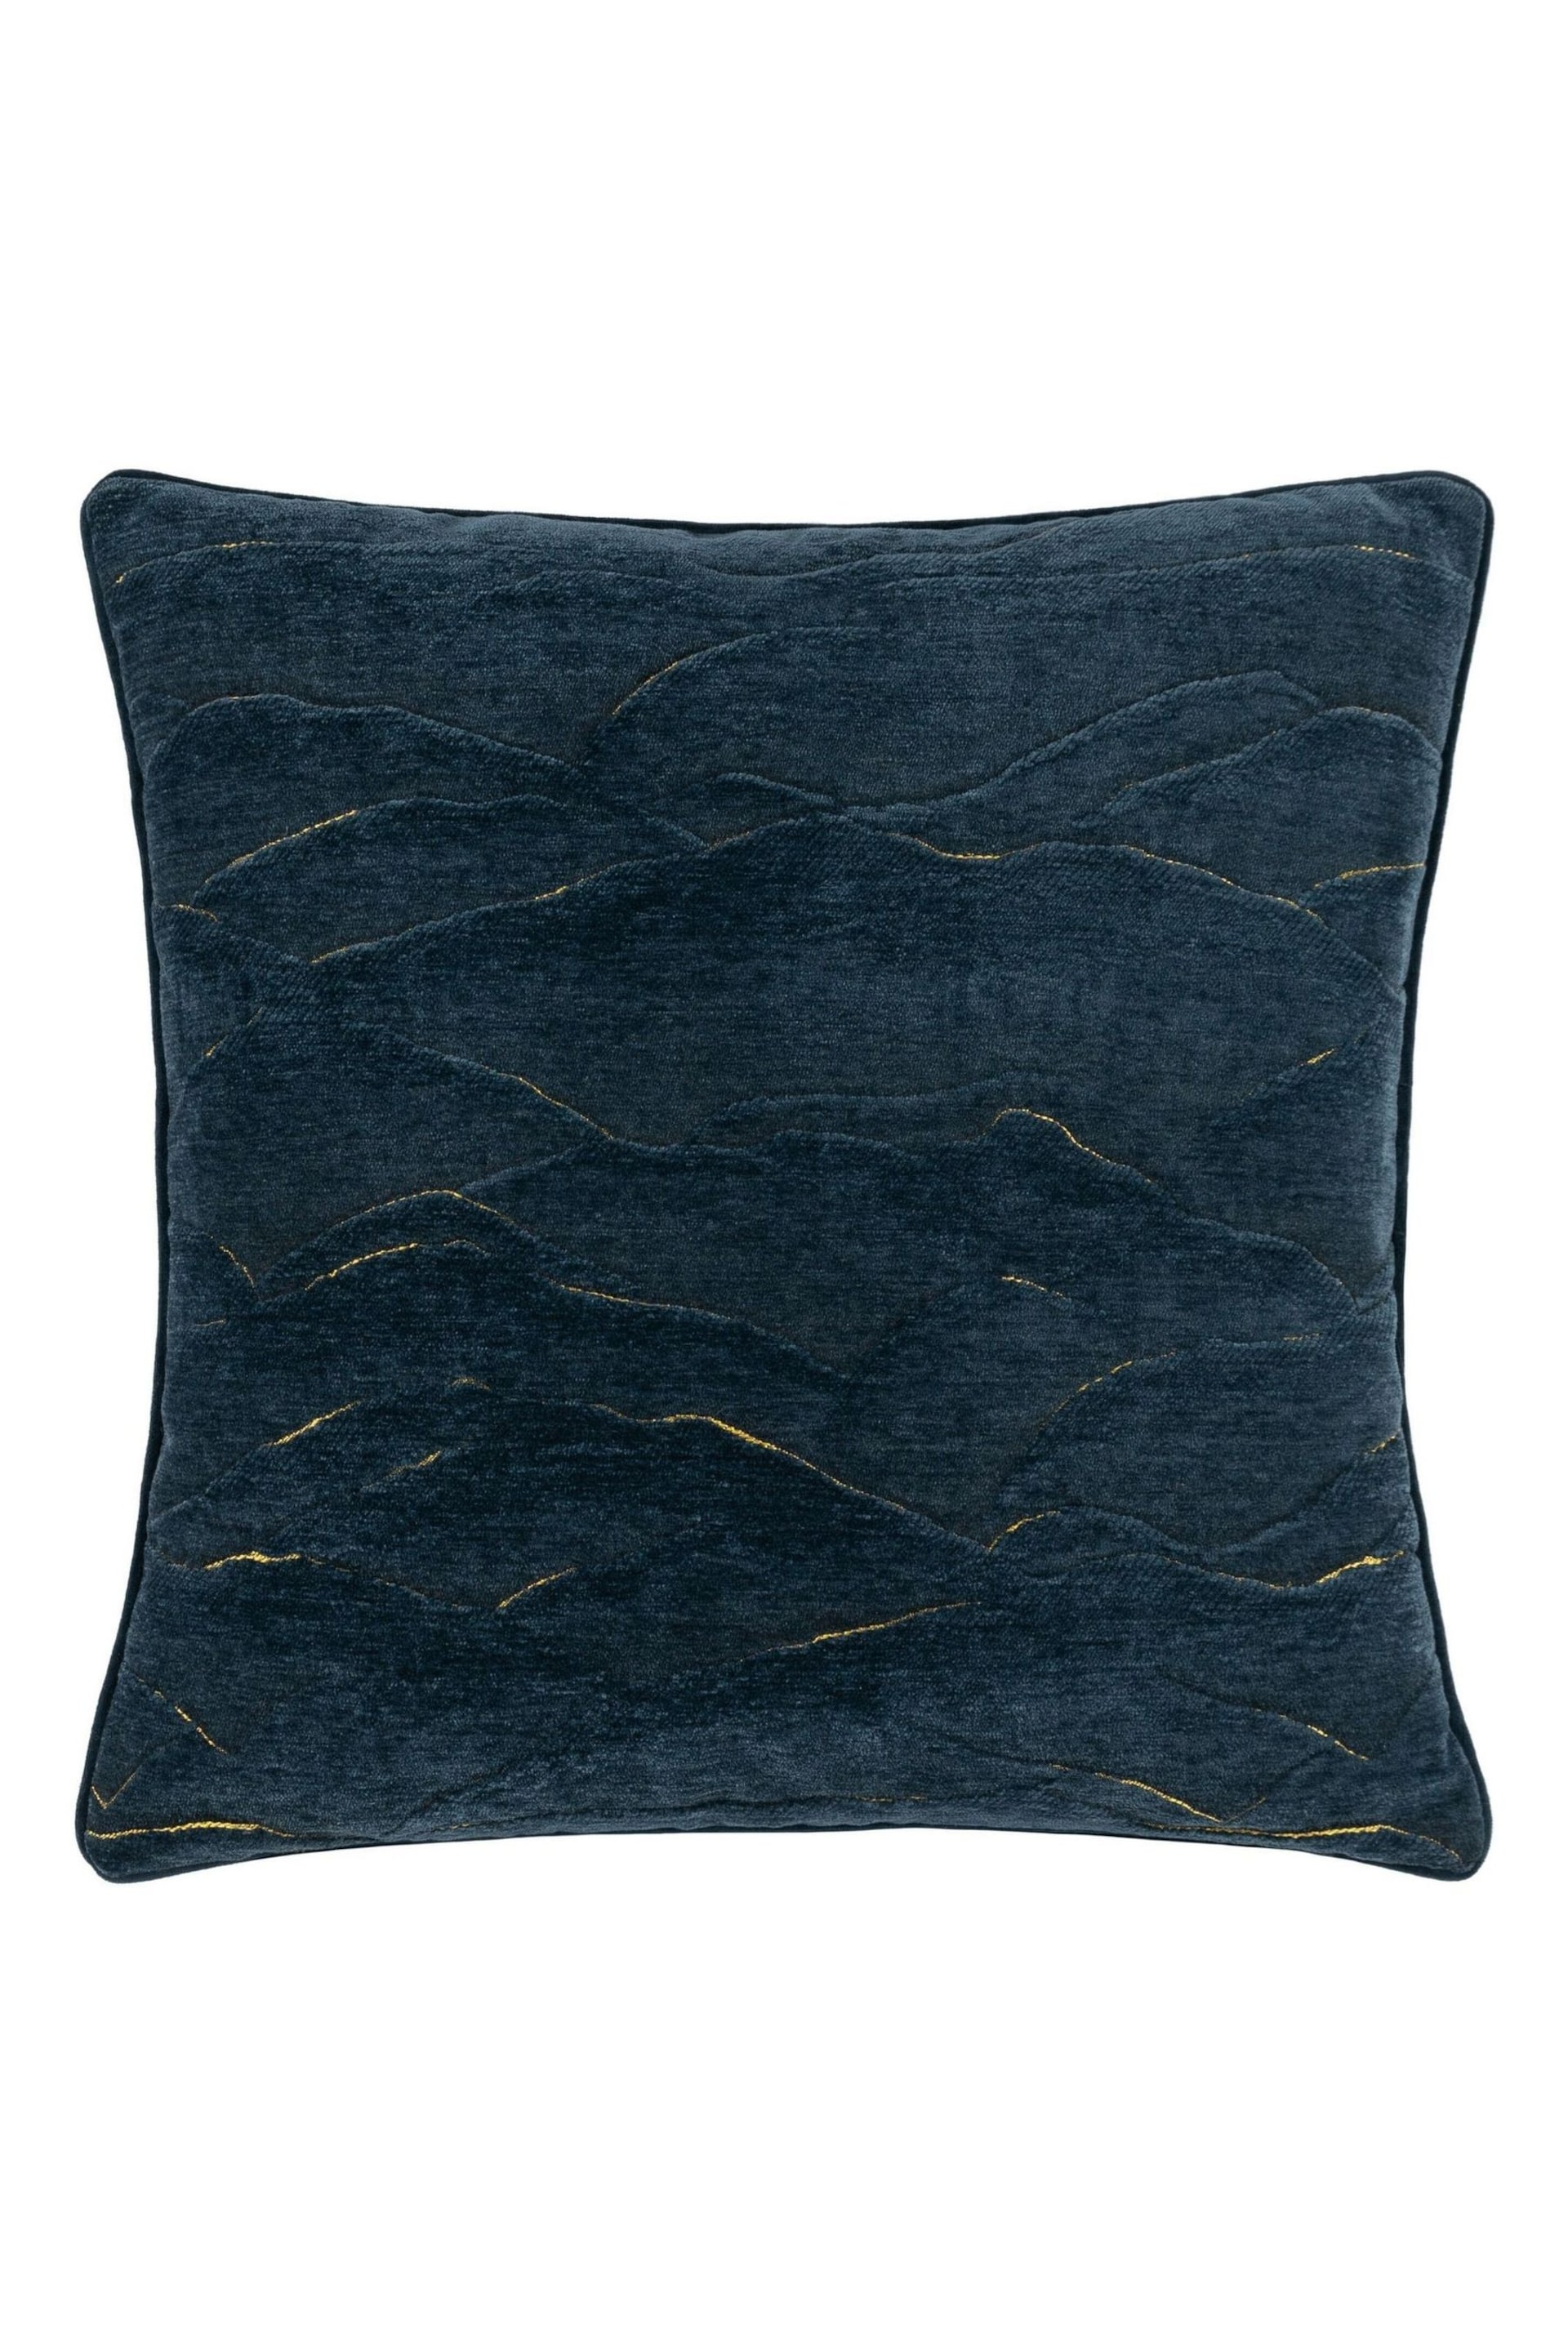 Paoletti Blue Stratus Jacquard Polyester Filled Cushion - Image 2 of 5